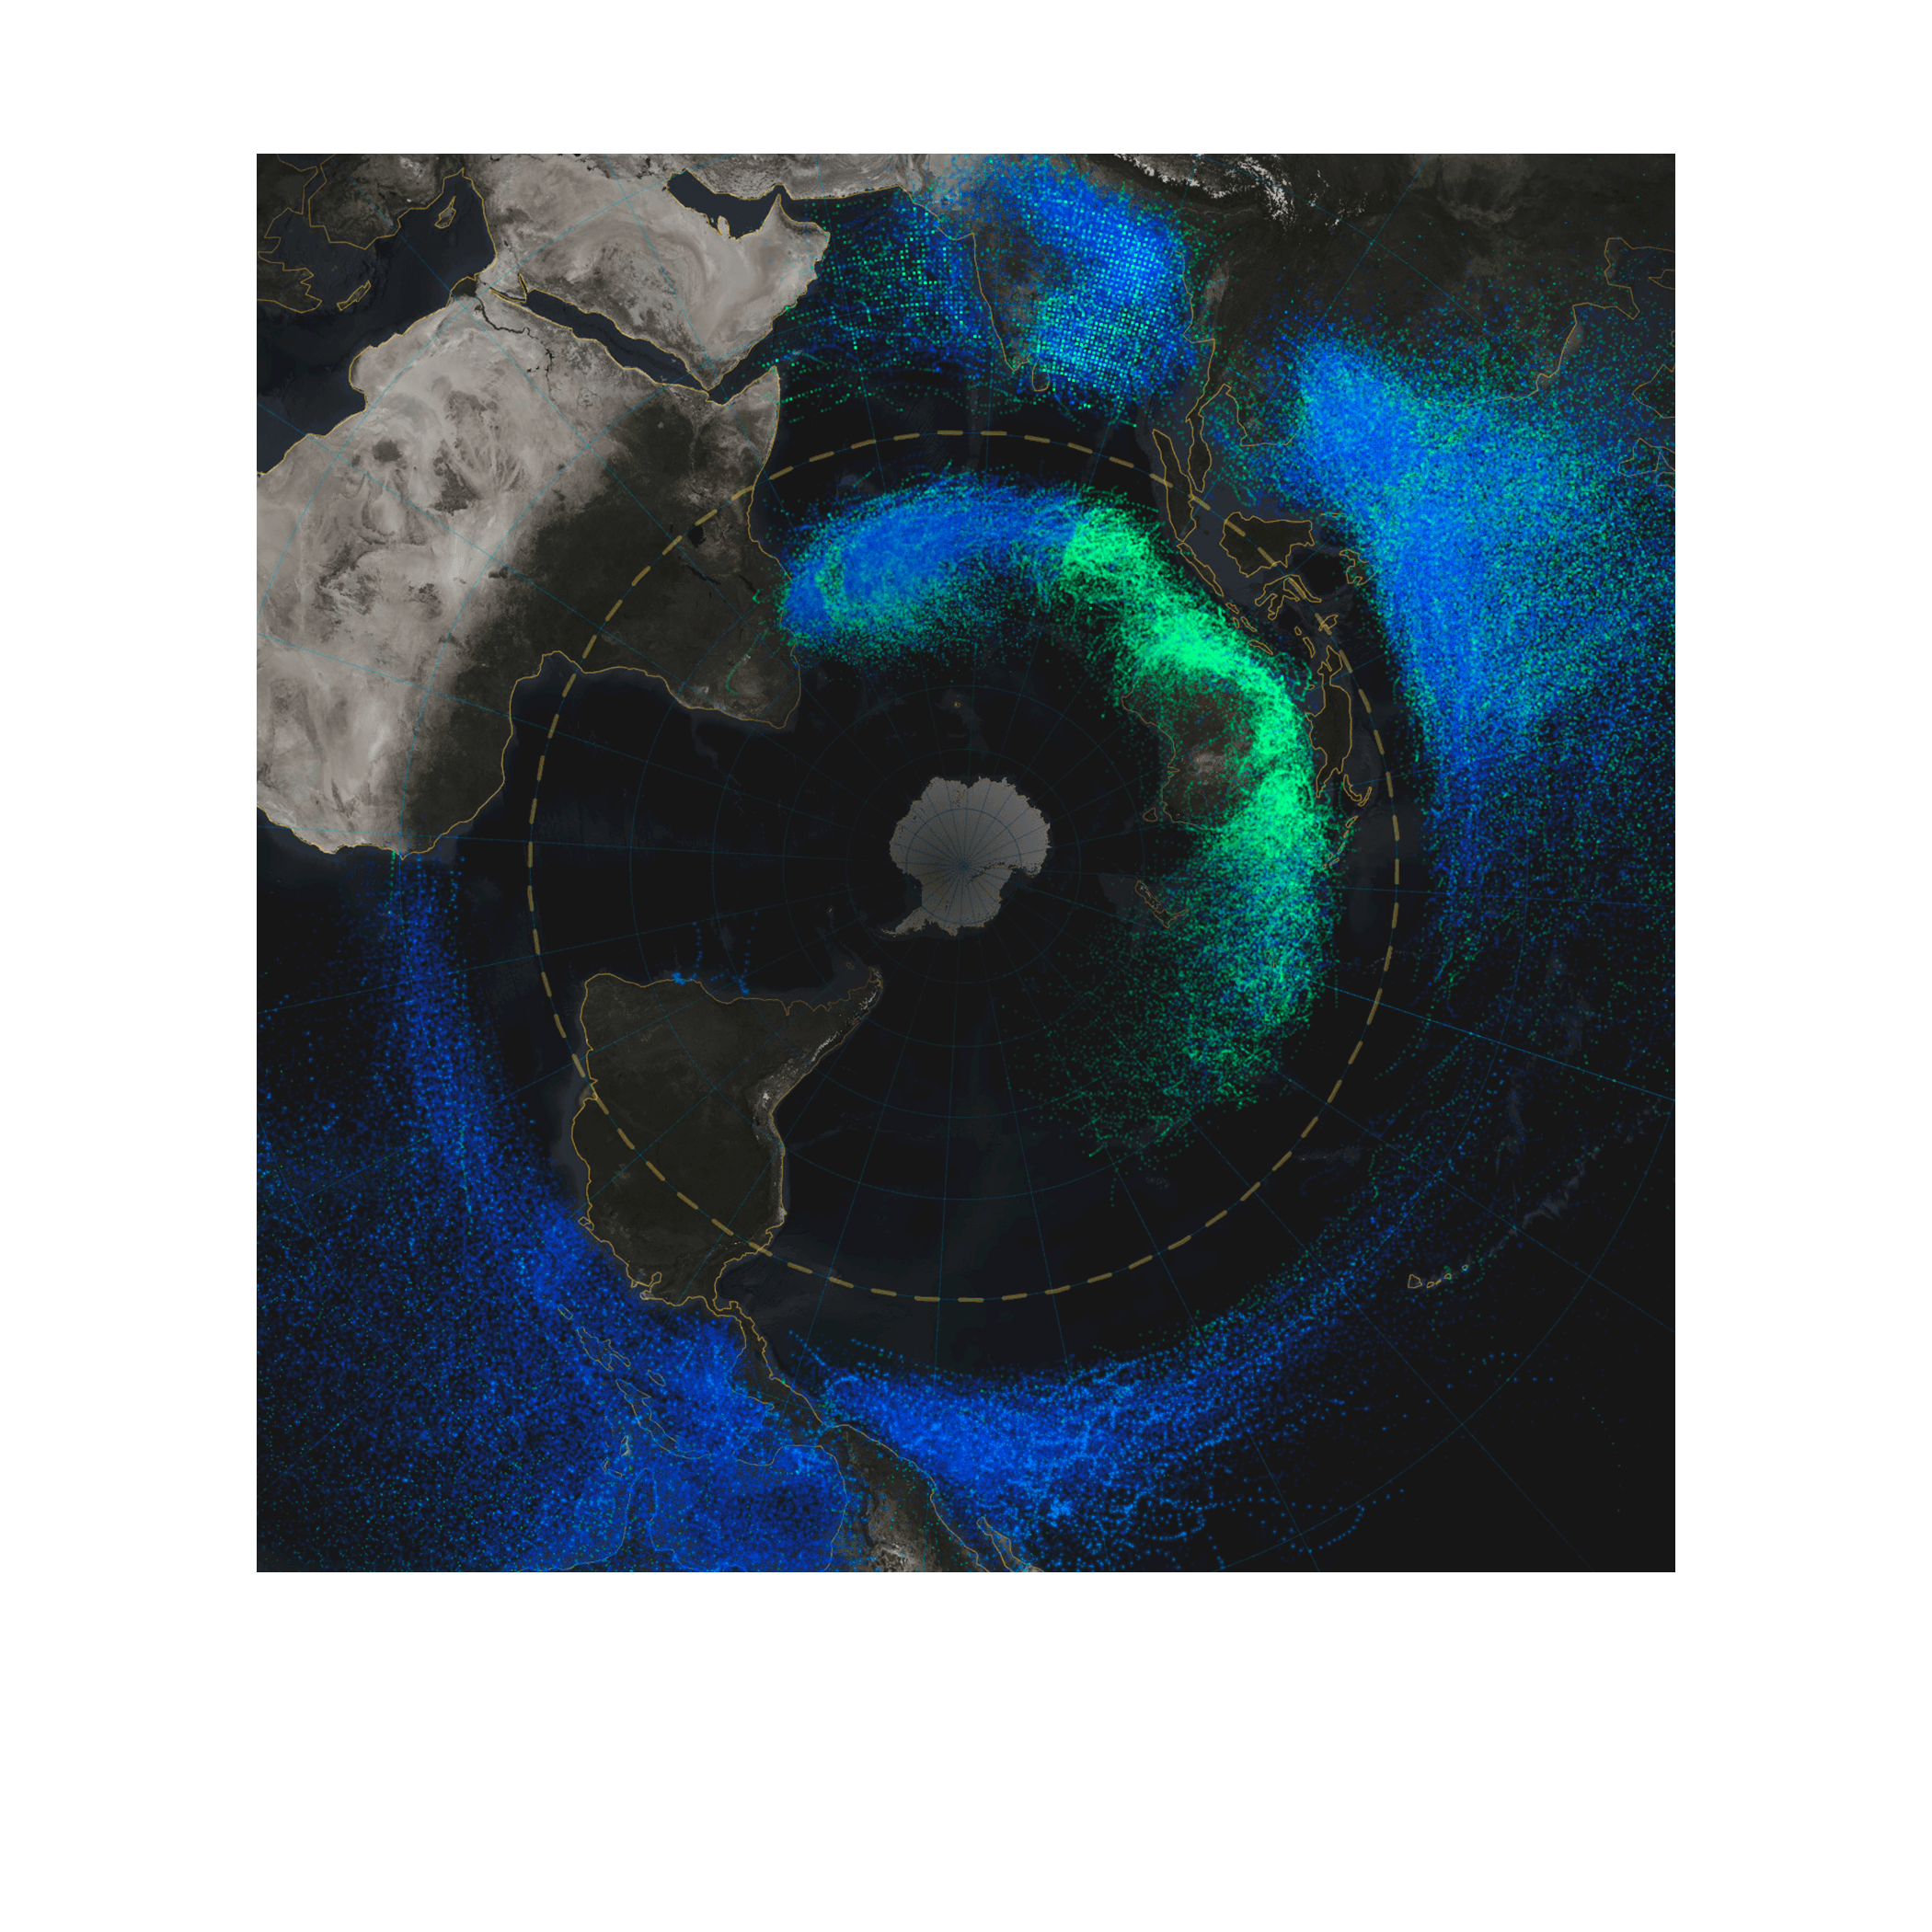 A map of the Southern Hemisphere shows a blue and green glowing ring around Antarctica which represents the paths of hurricanes and tropical storms since 1851